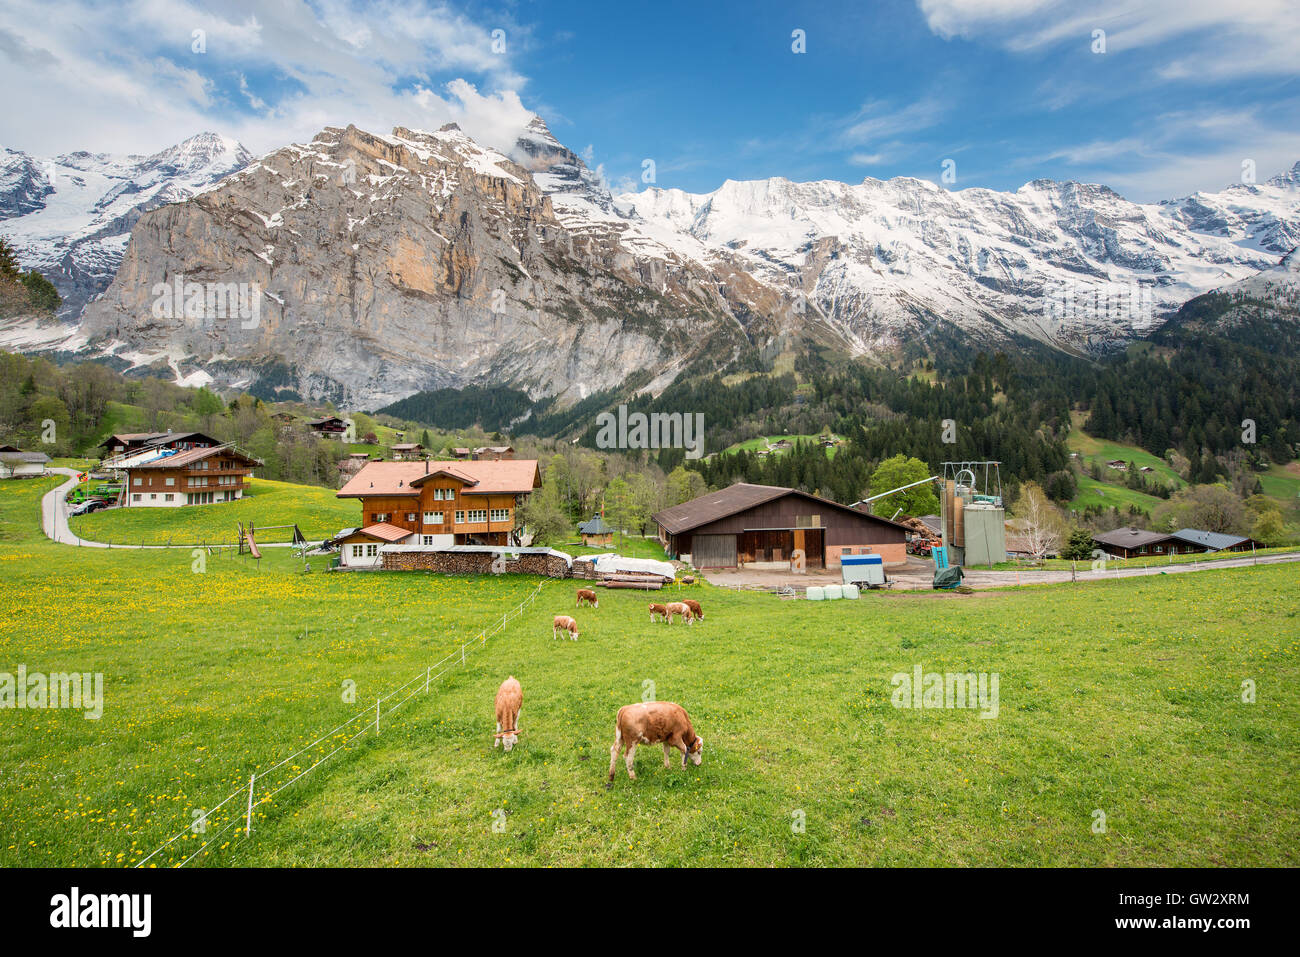 Cow and farmhouse with swiss alps snow mountain in background in Grindelwald, Switzerland.Livestock agriculture in Switzerland. Stock Photo